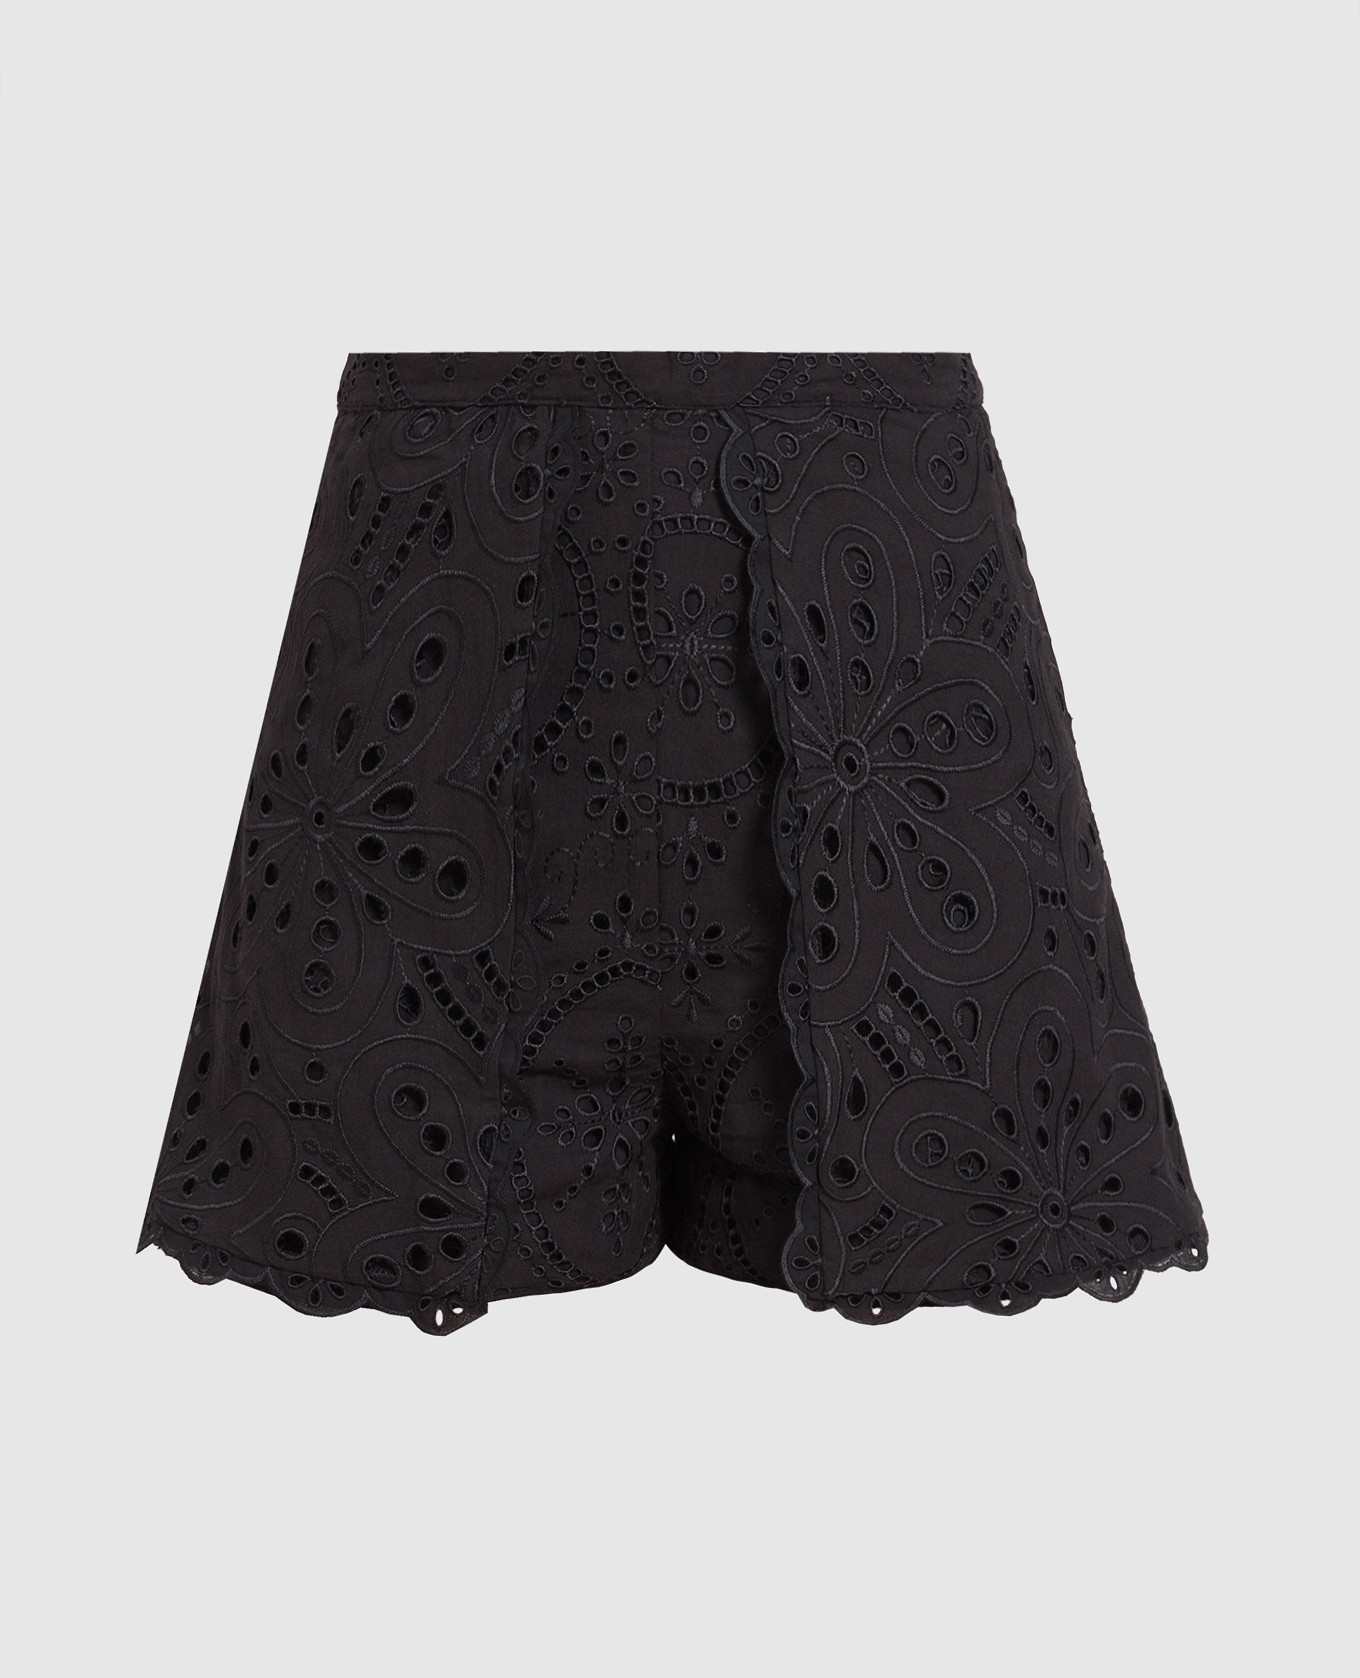 Alida black shorts with broderie embroidery